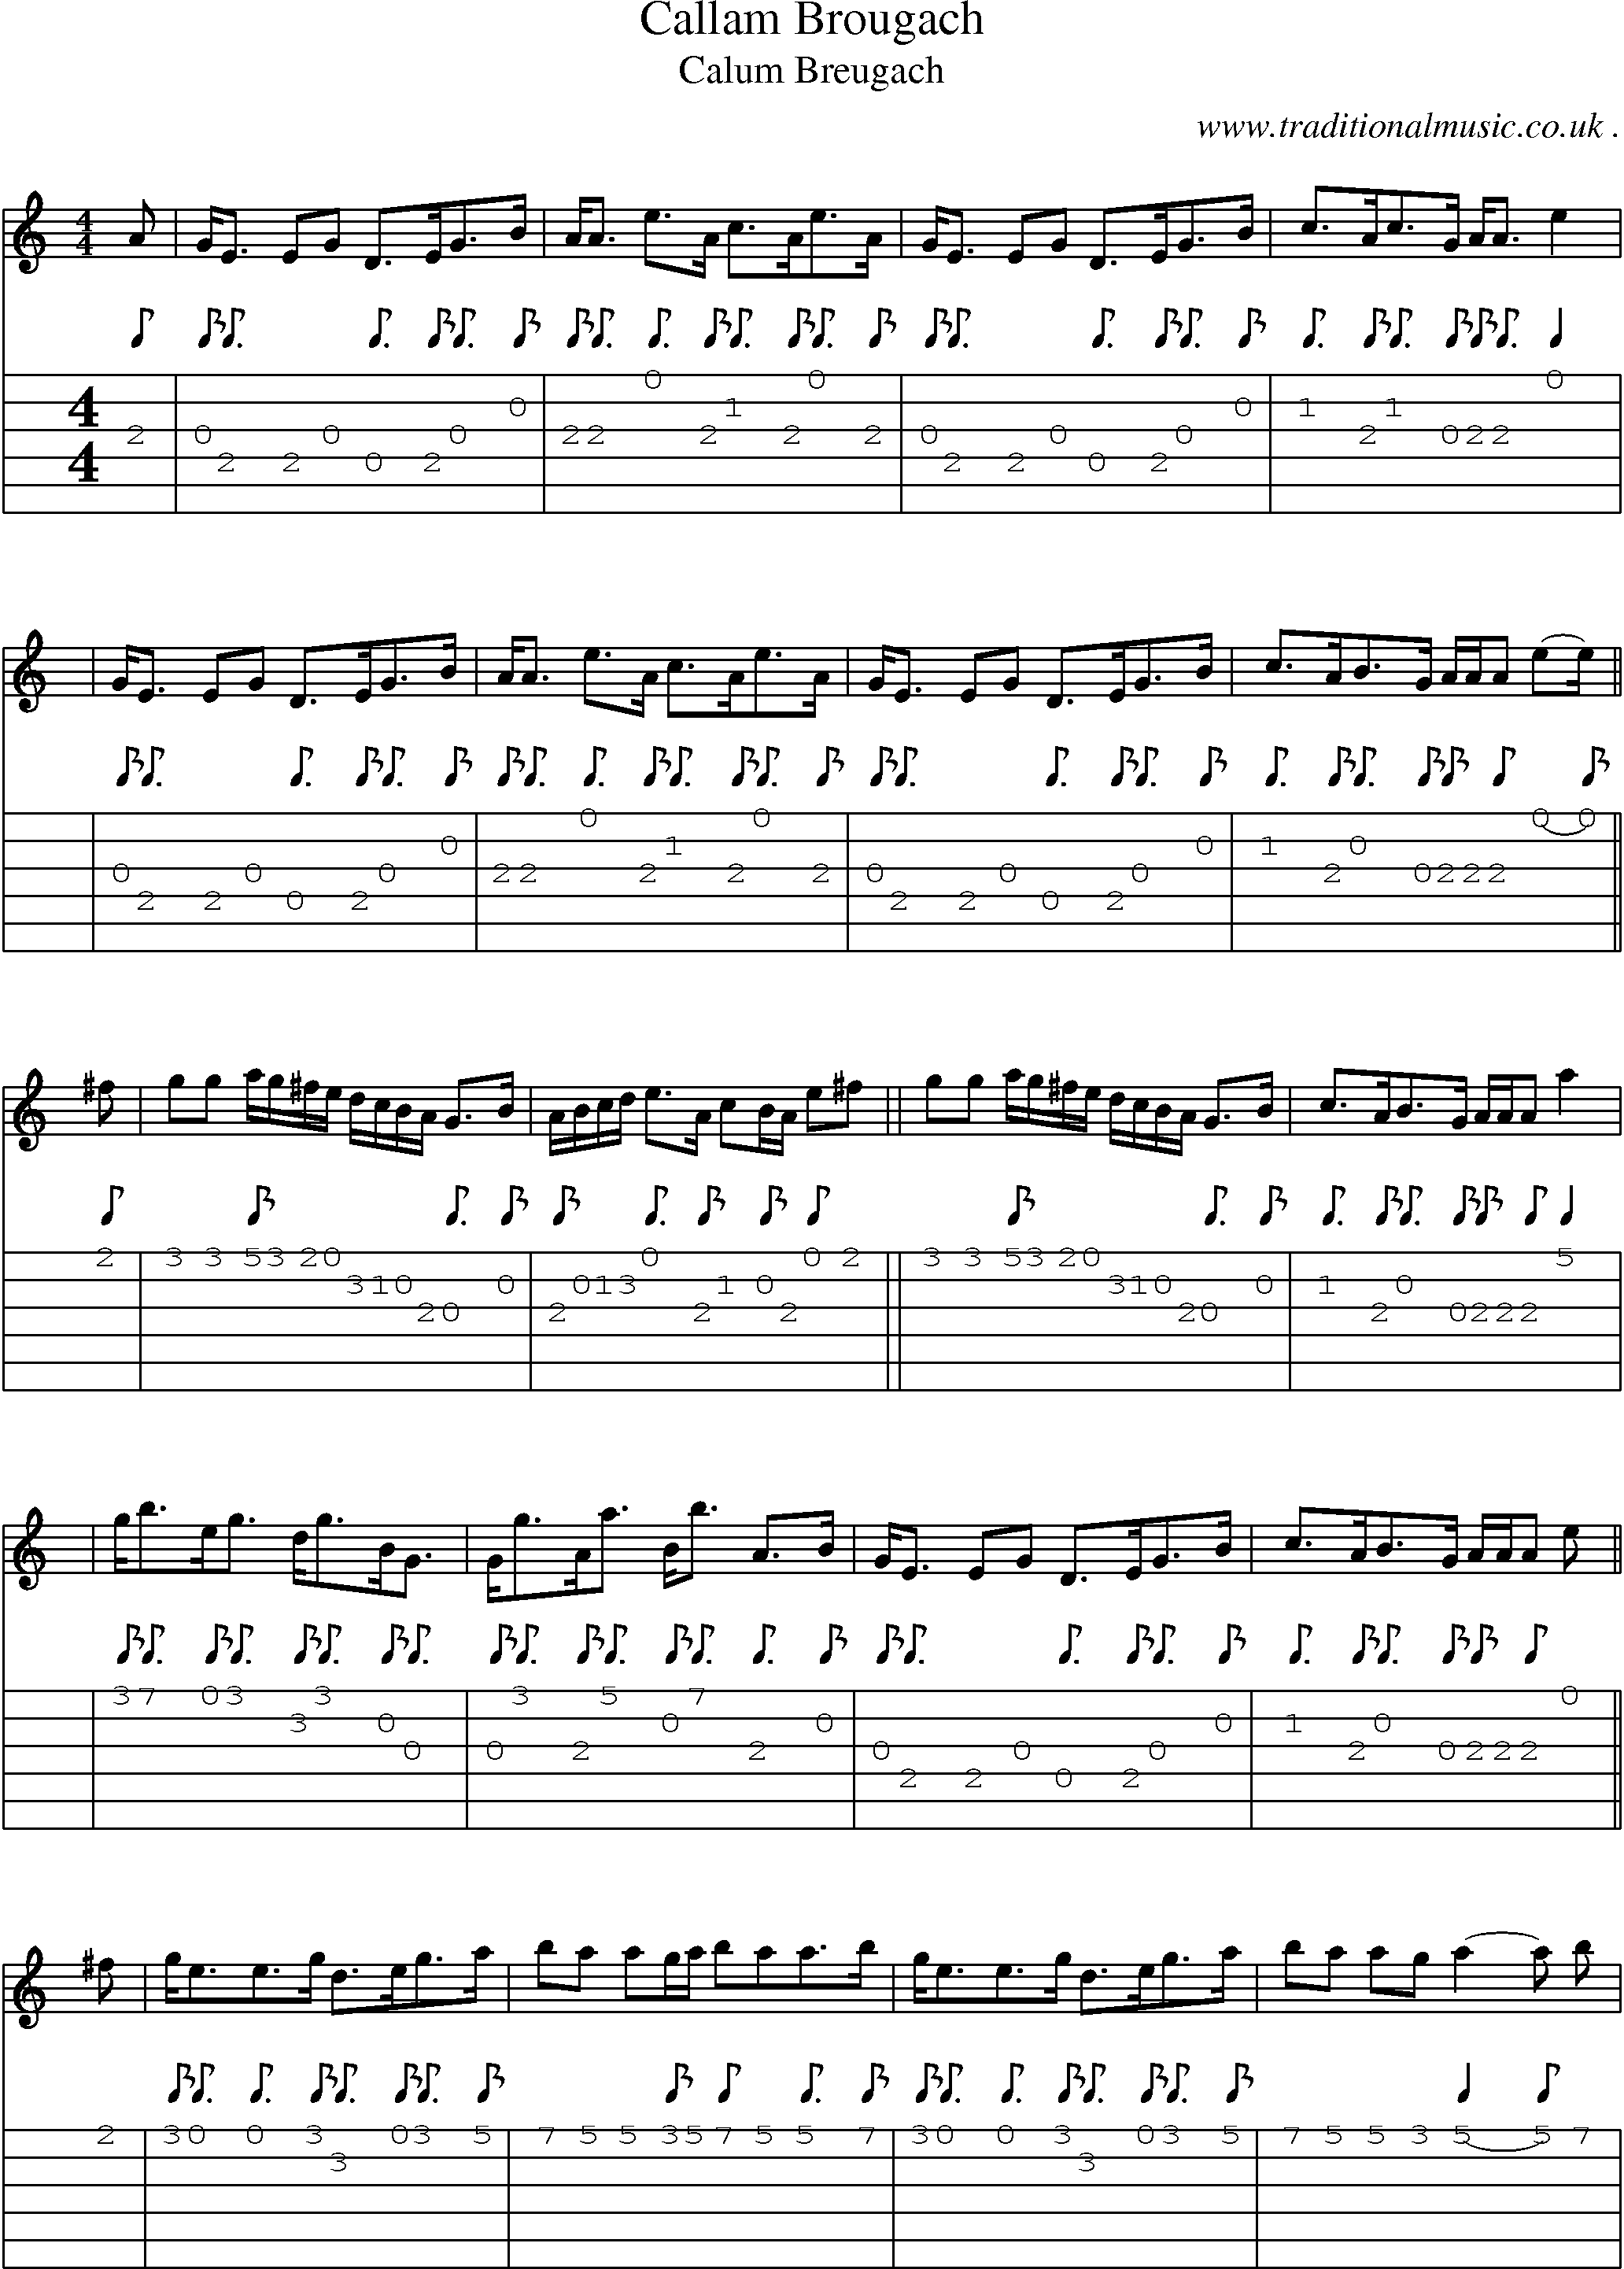 Sheet-music  score, Chords and Guitar Tabs for Callam Brougach